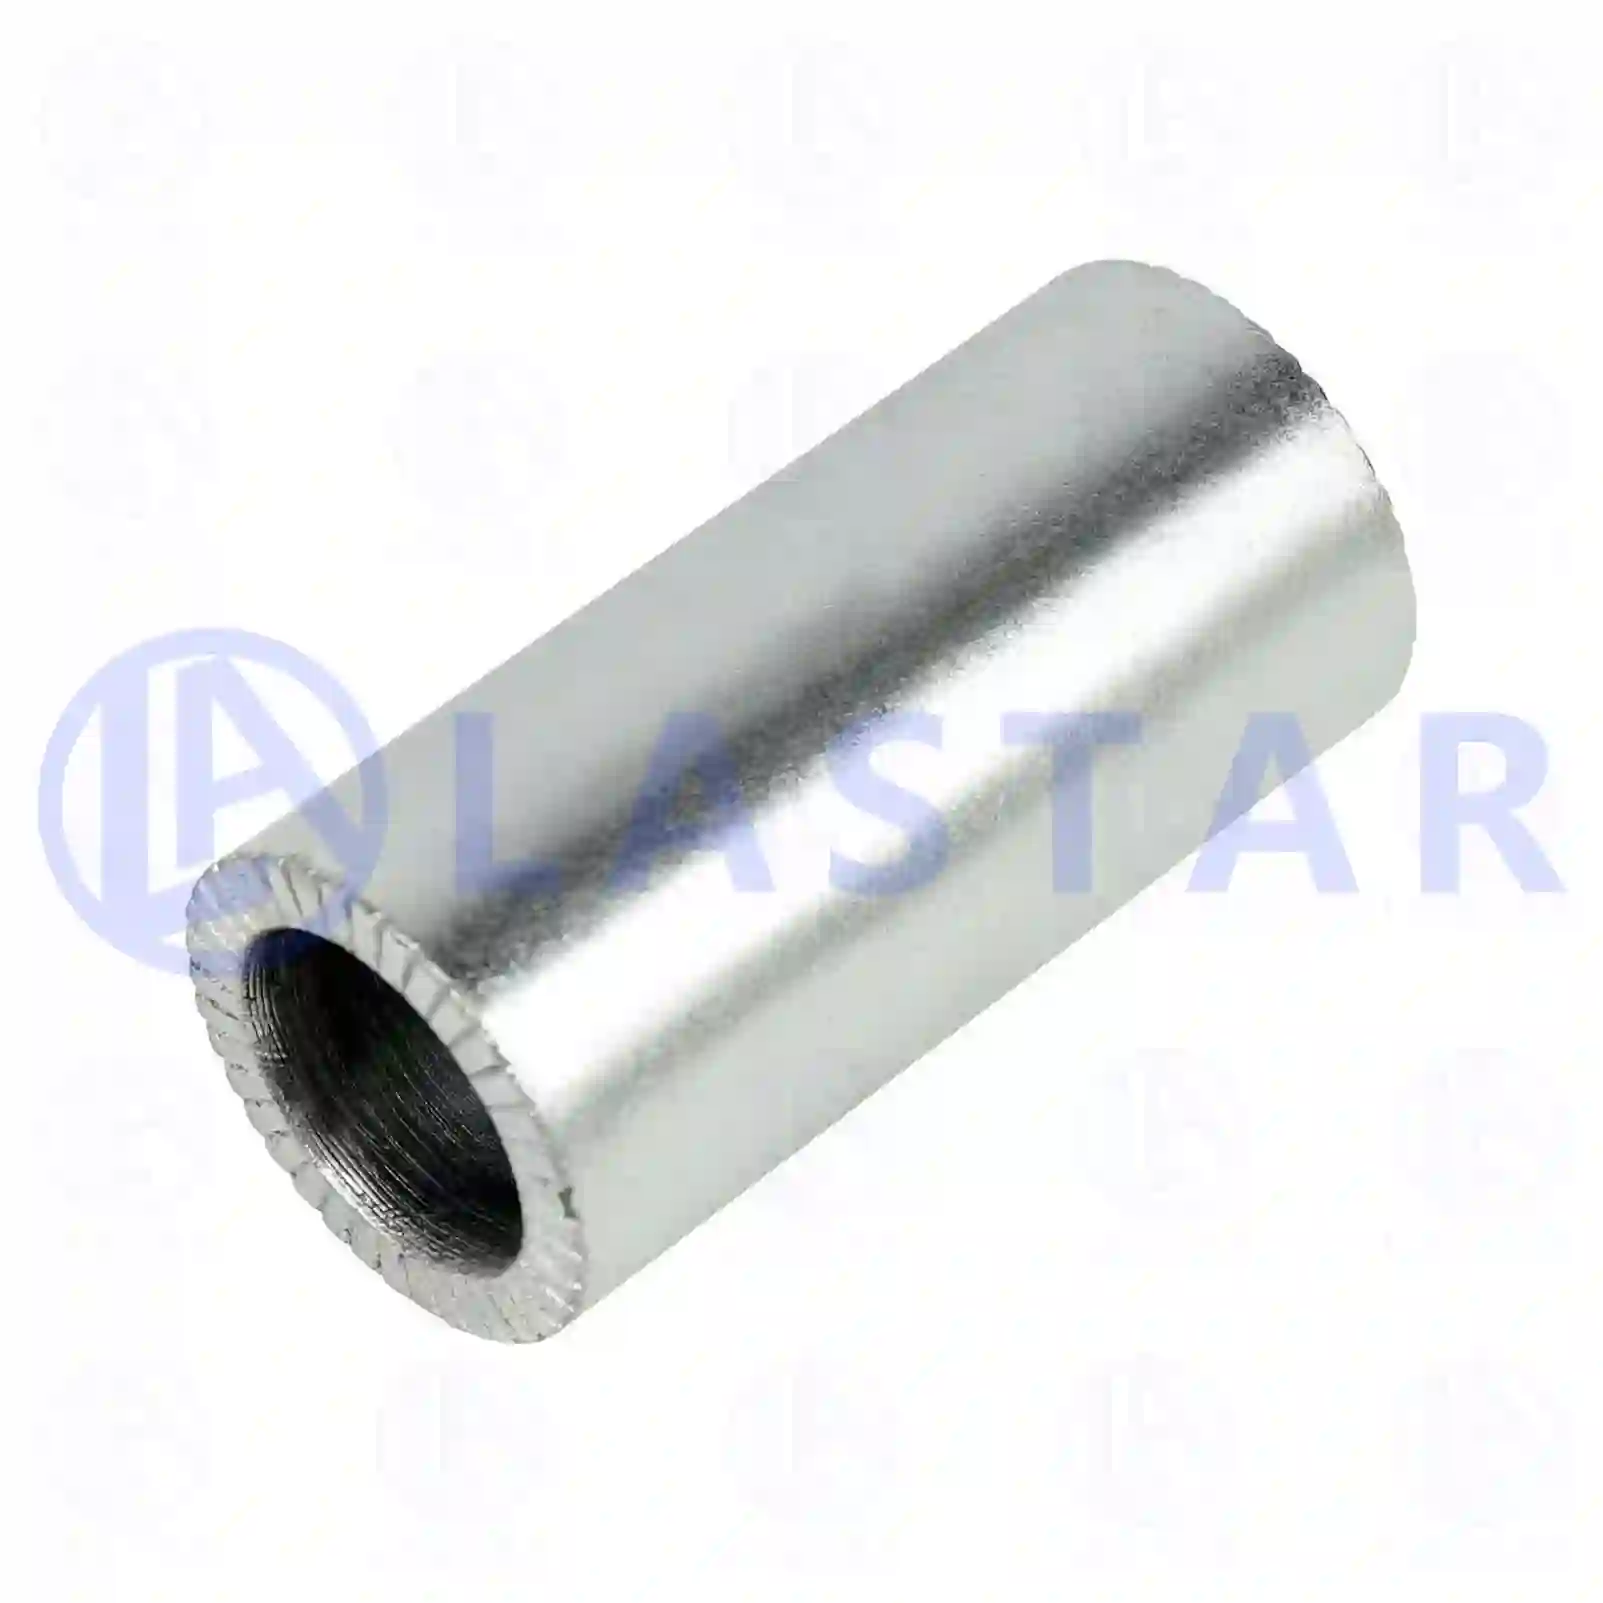 Sleeve, 77729039, 1588445, , ||  77729039 Lastar Spare Part | Truck Spare Parts, Auotomotive Spare Parts Sleeve, 77729039, 1588445, , ||  77729039 Lastar Spare Part | Truck Spare Parts, Auotomotive Spare Parts